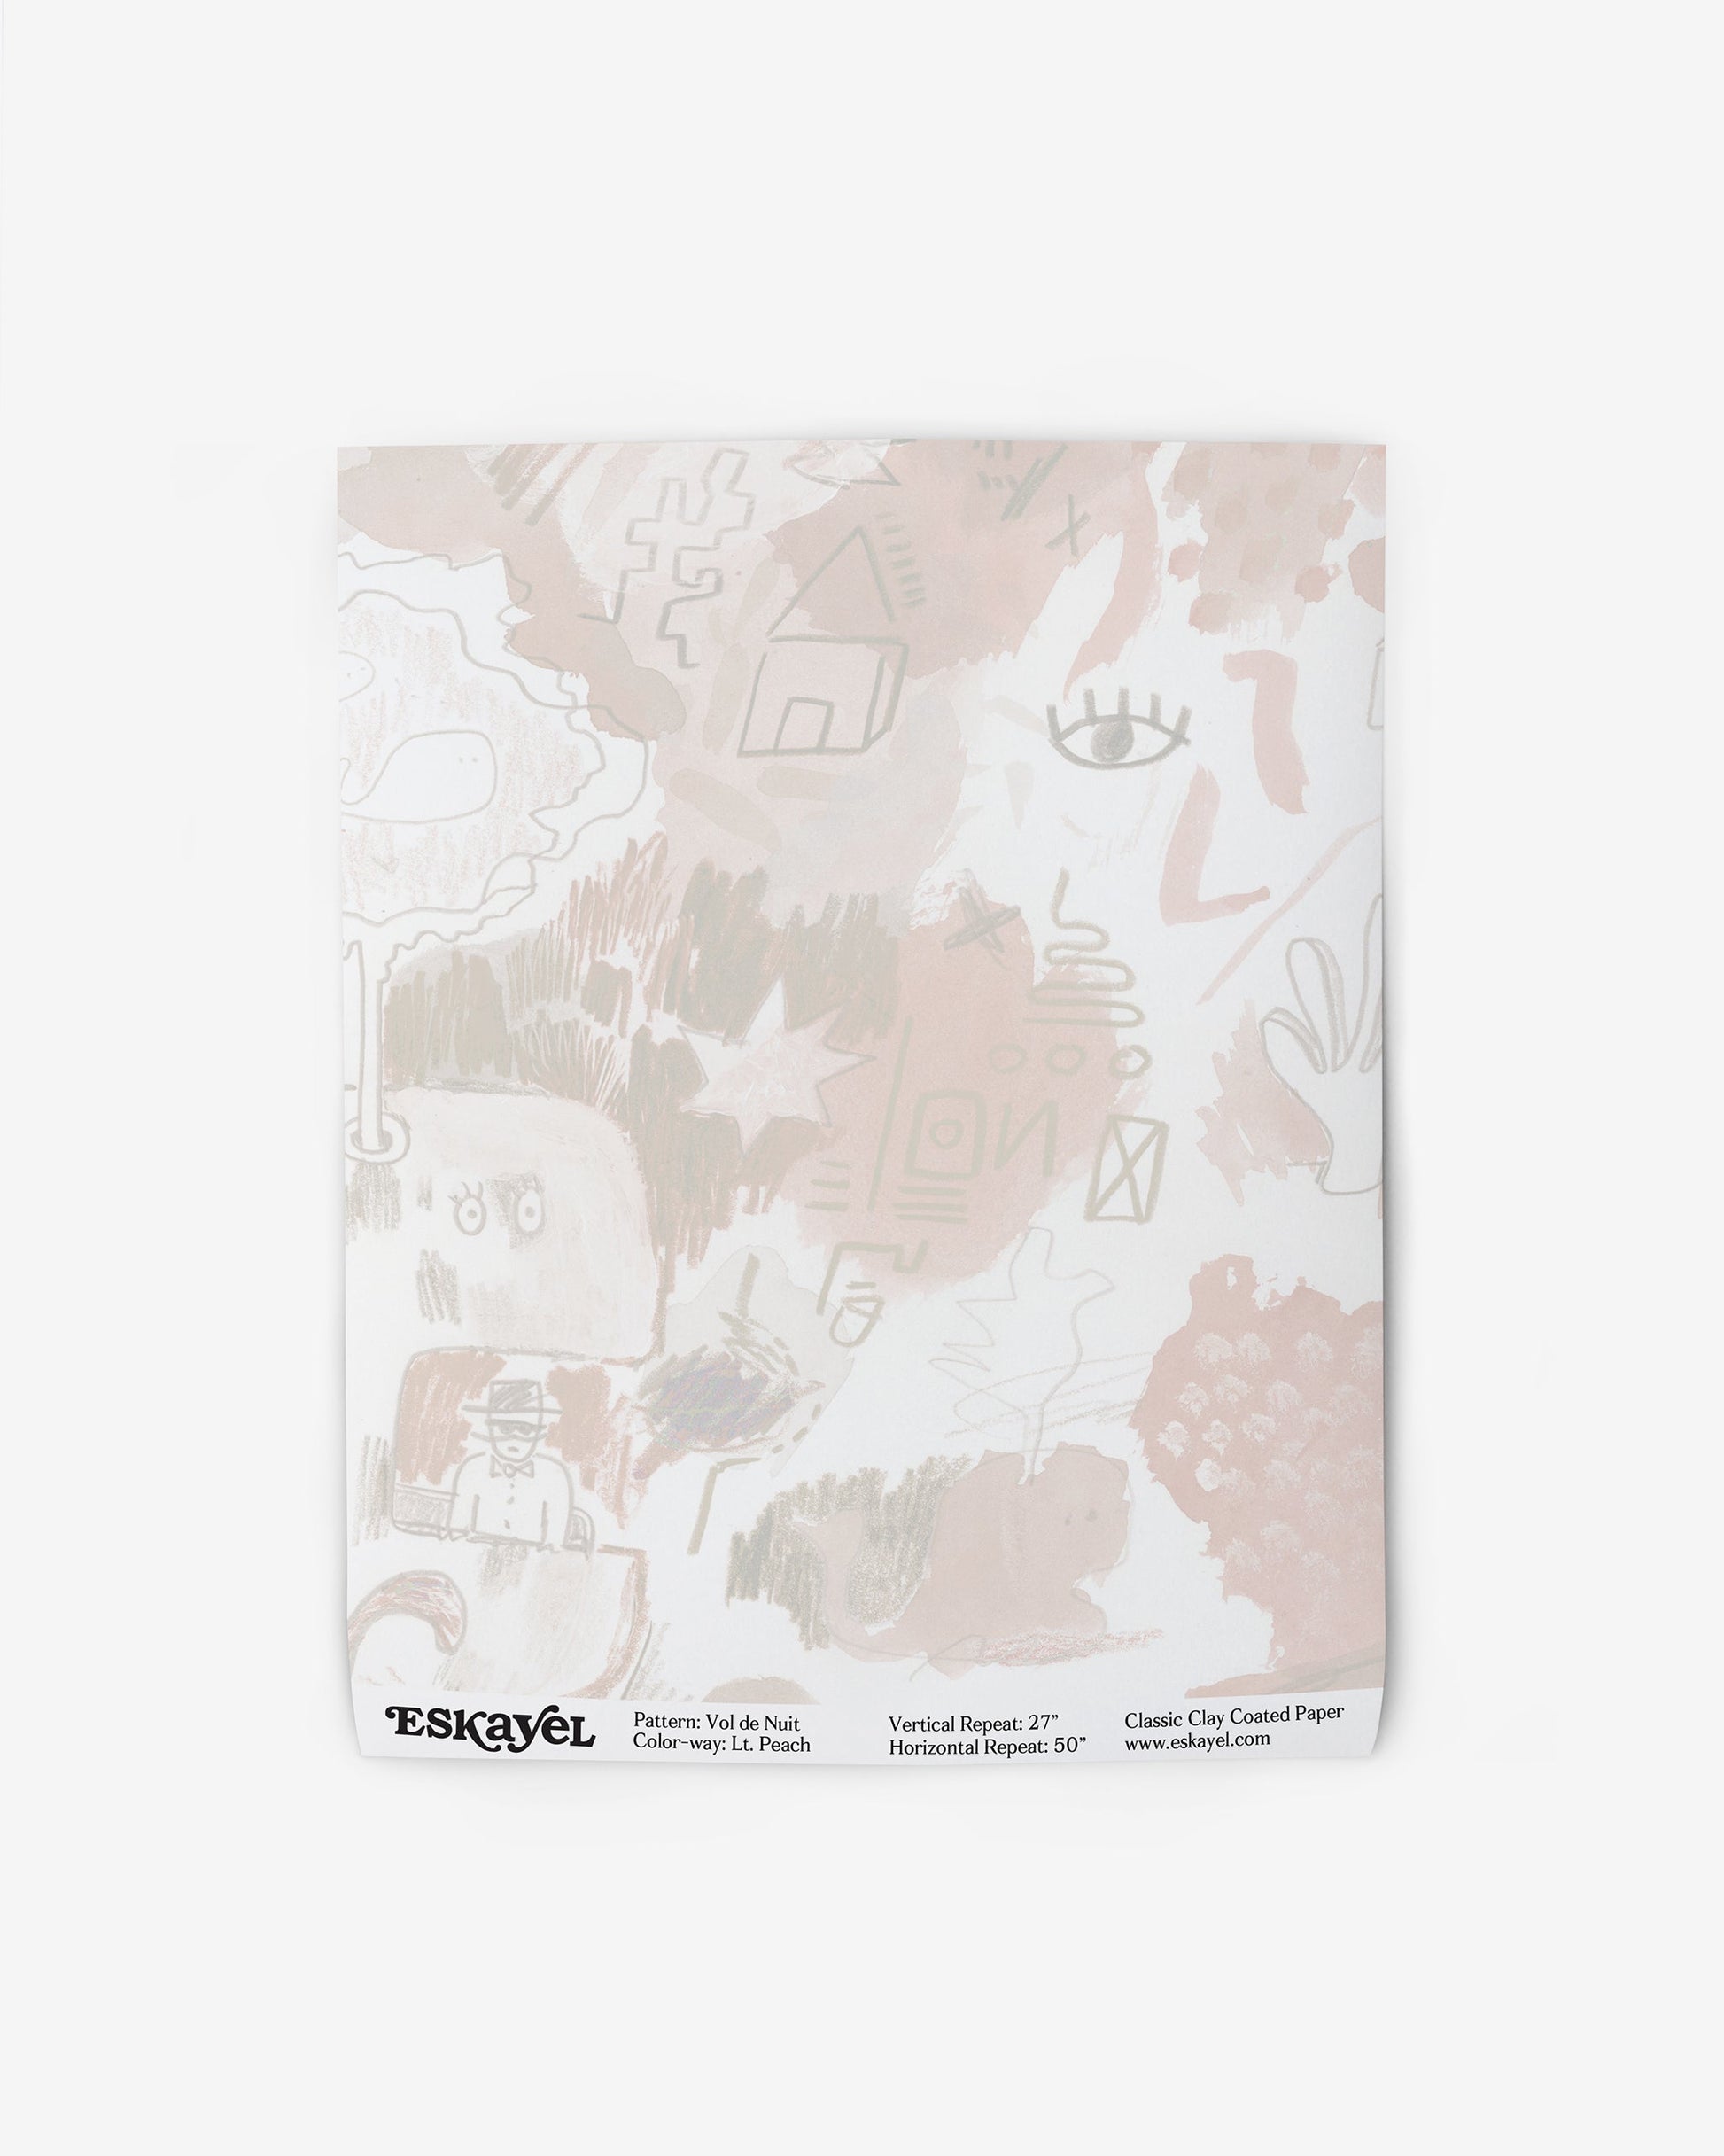 A pink and white Vol de Nuit Wallpaper Light Peach notebook with a design by Eskayel on luxury fabric